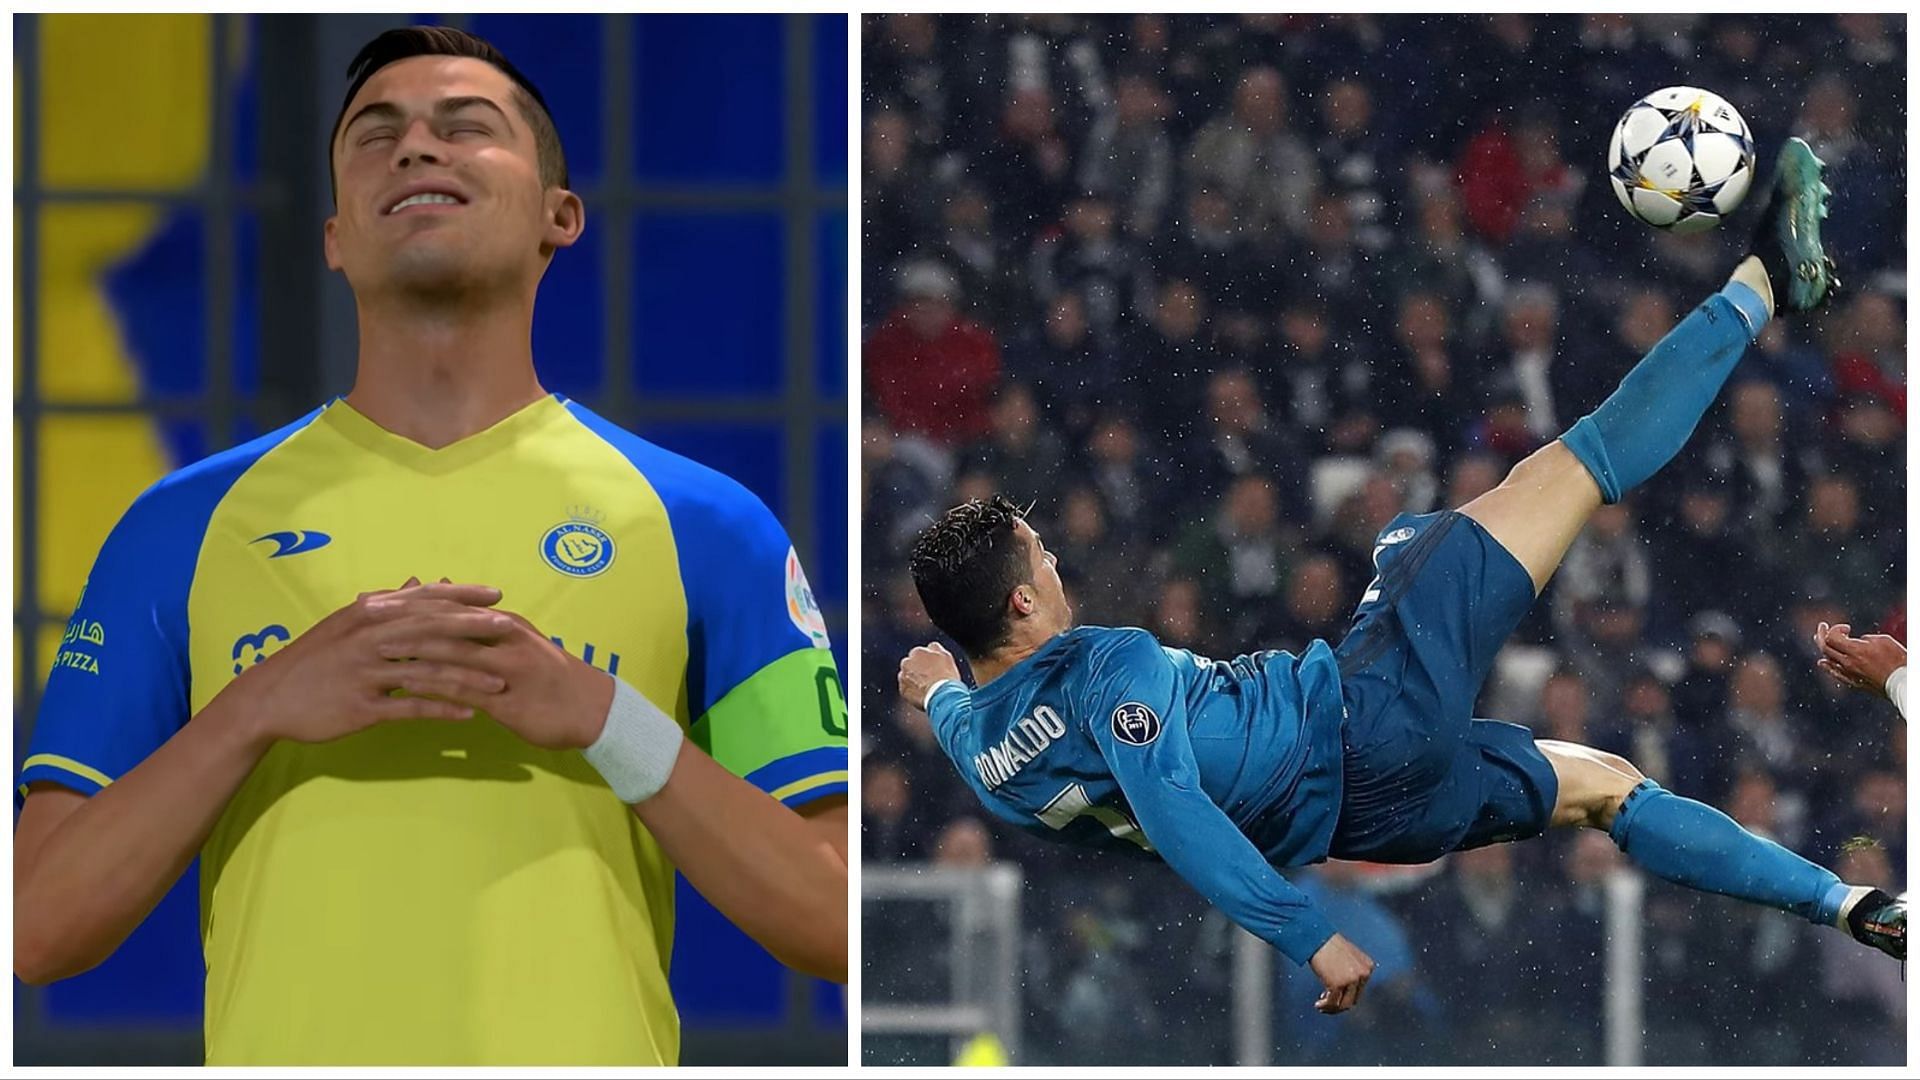 Bicycle kicks are overpowered in FIFA 23 (Images via EA Sports and Getty)